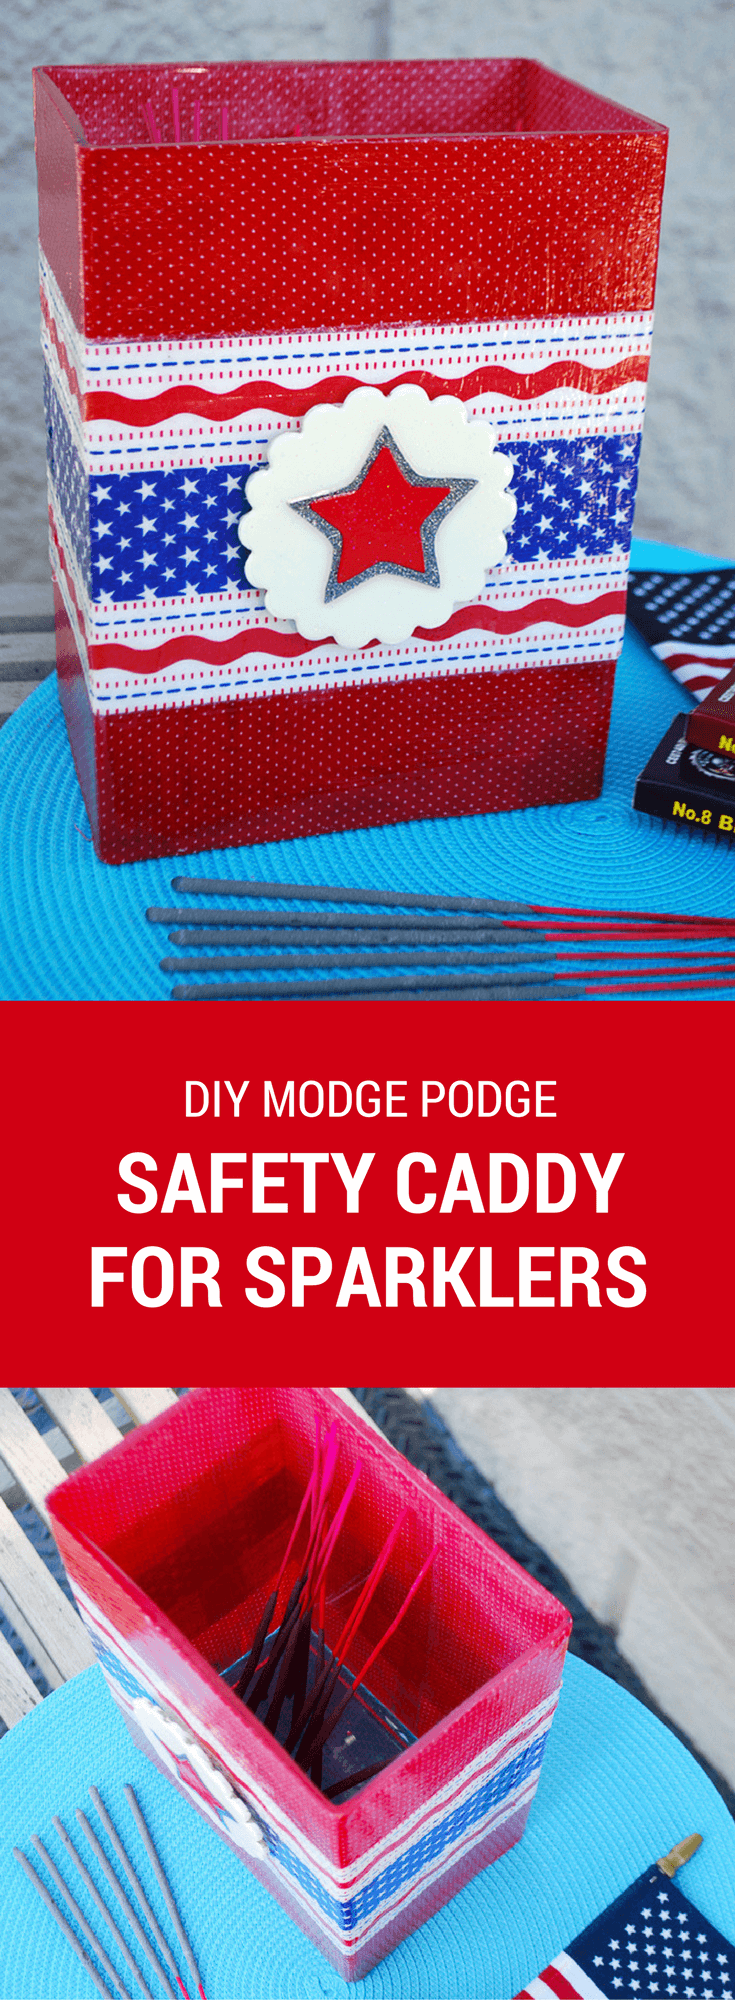 DIY safety sparkler caddy. Just fill with water and drop in hot used sparklers for NO sparkler burns this Fourth of July! Mod Podge a glass vase with red, white and blue fabric, paper napkins and stars to make this easy and useful 4th of July craft.